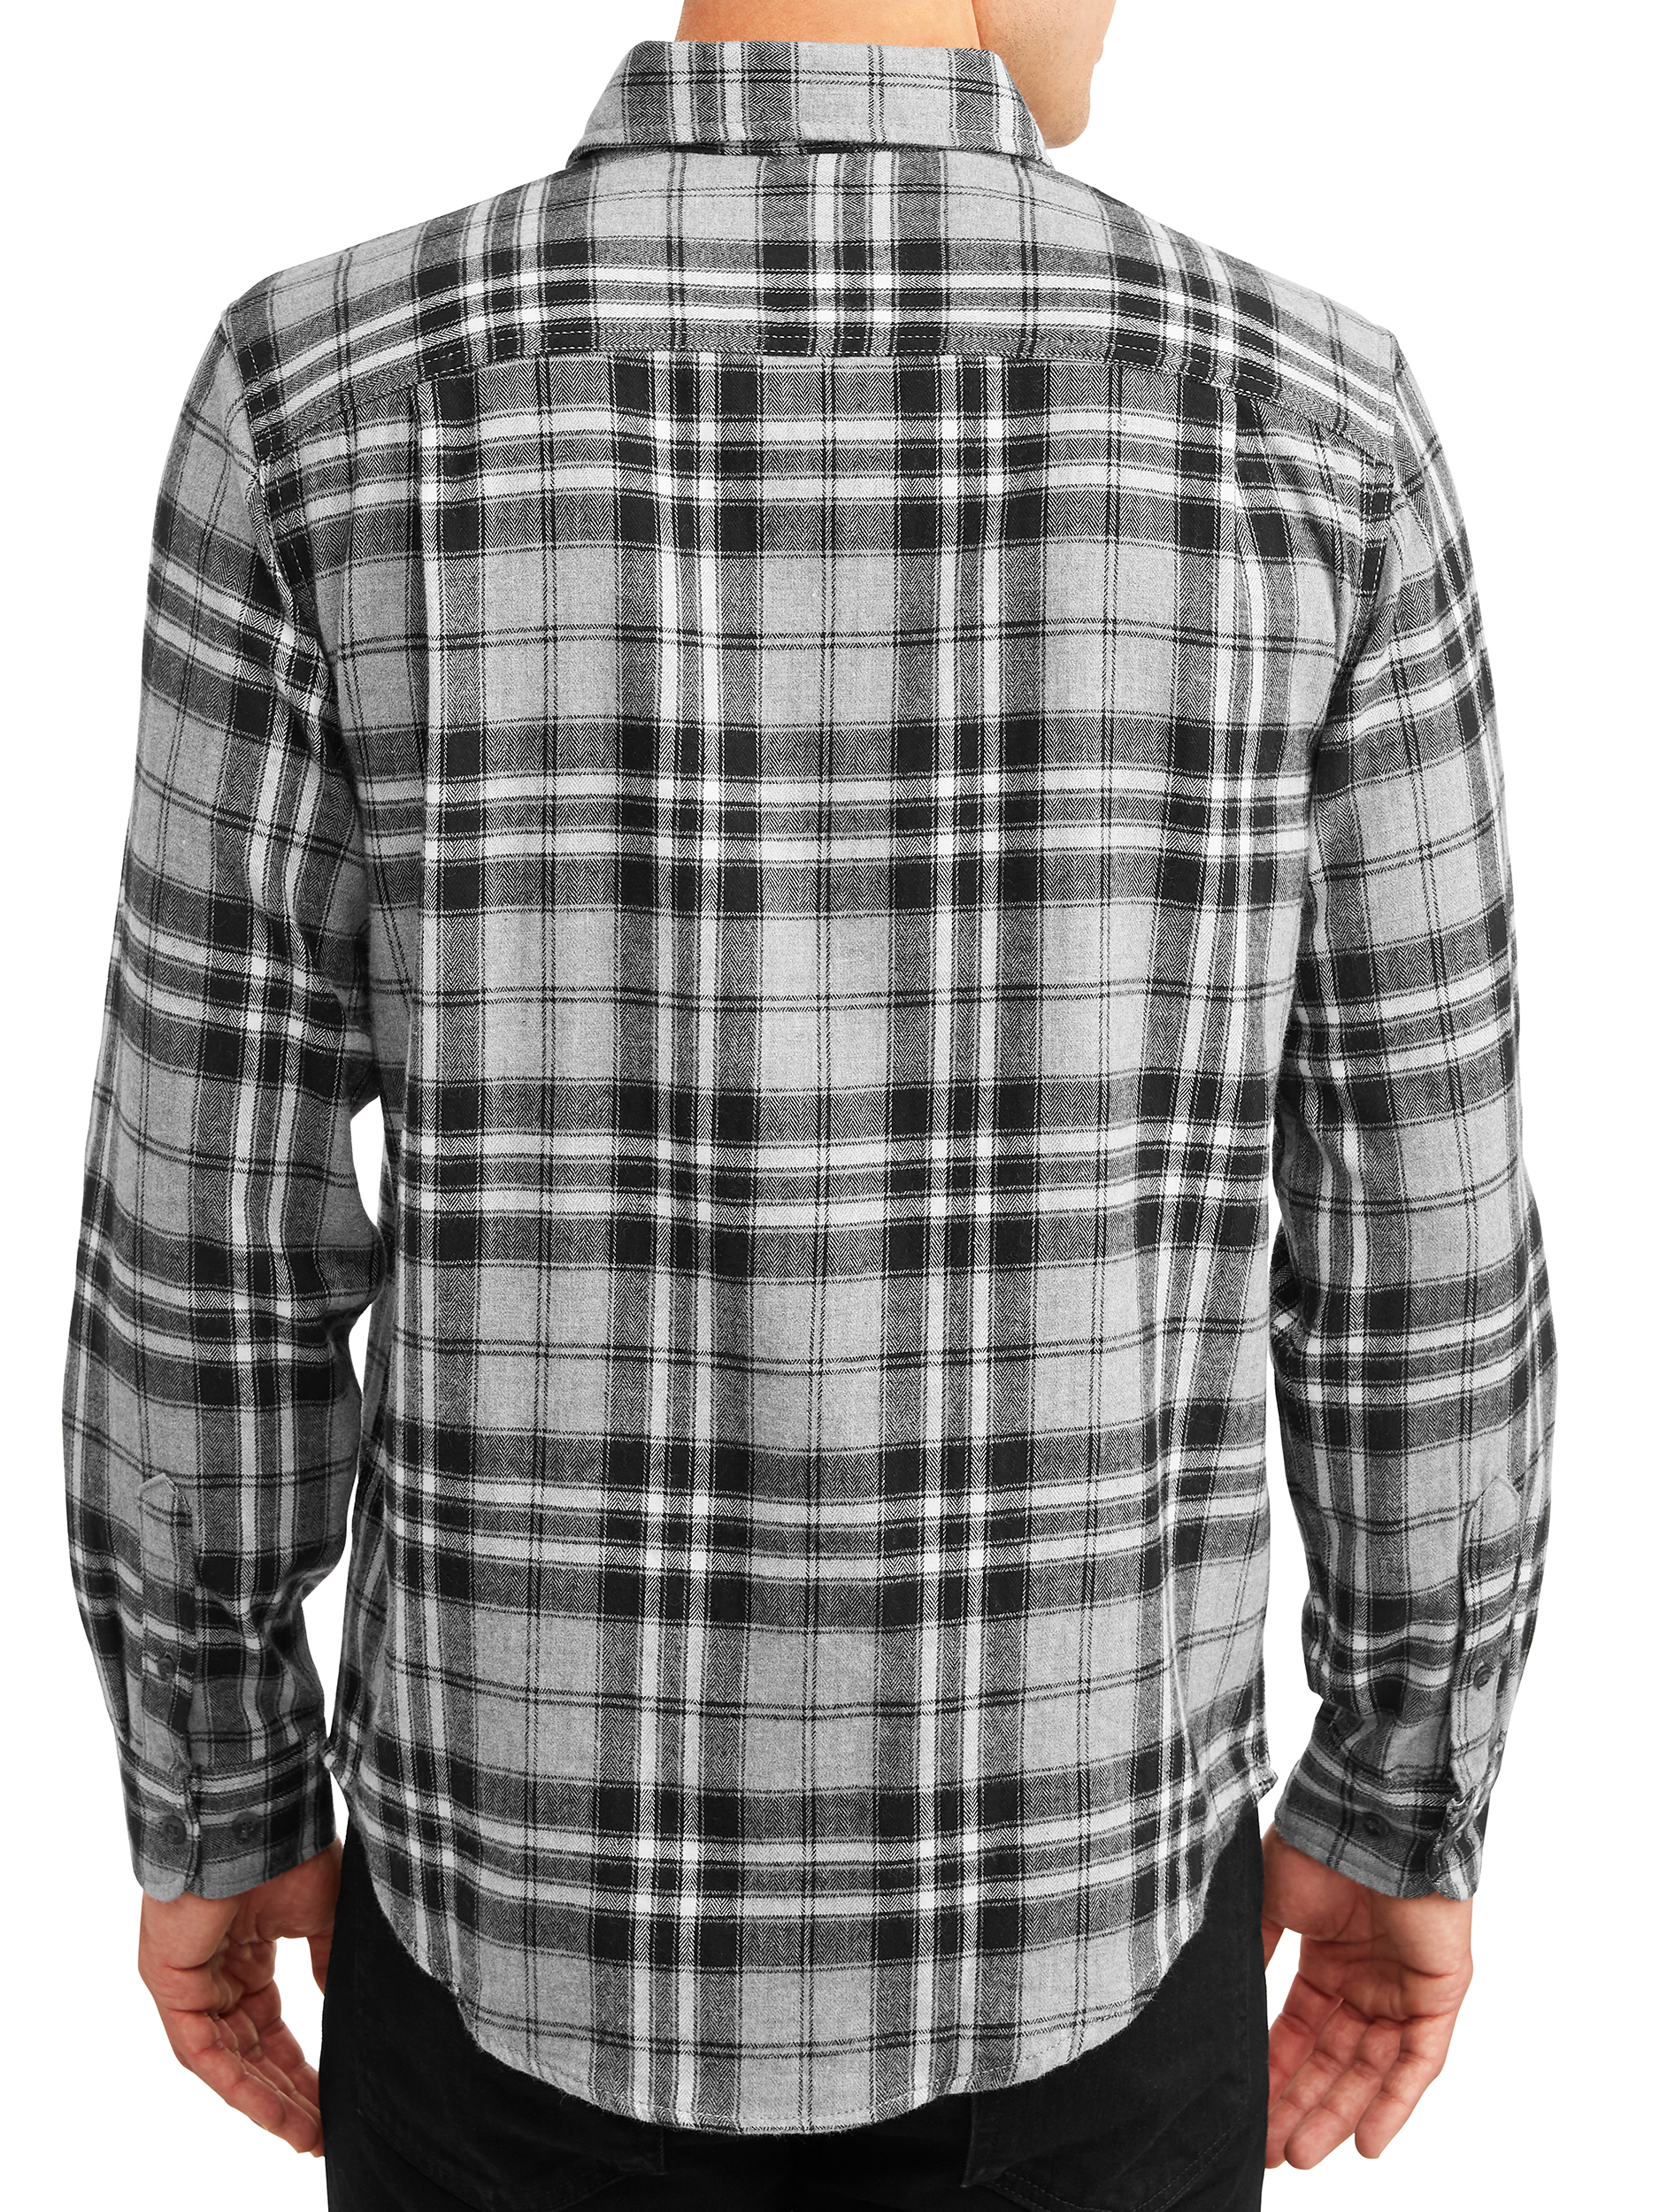 George Men's and Big Men's Long Sleeve Super Soft Flannel Shirt, up to size 3XLT - image 3 of 4